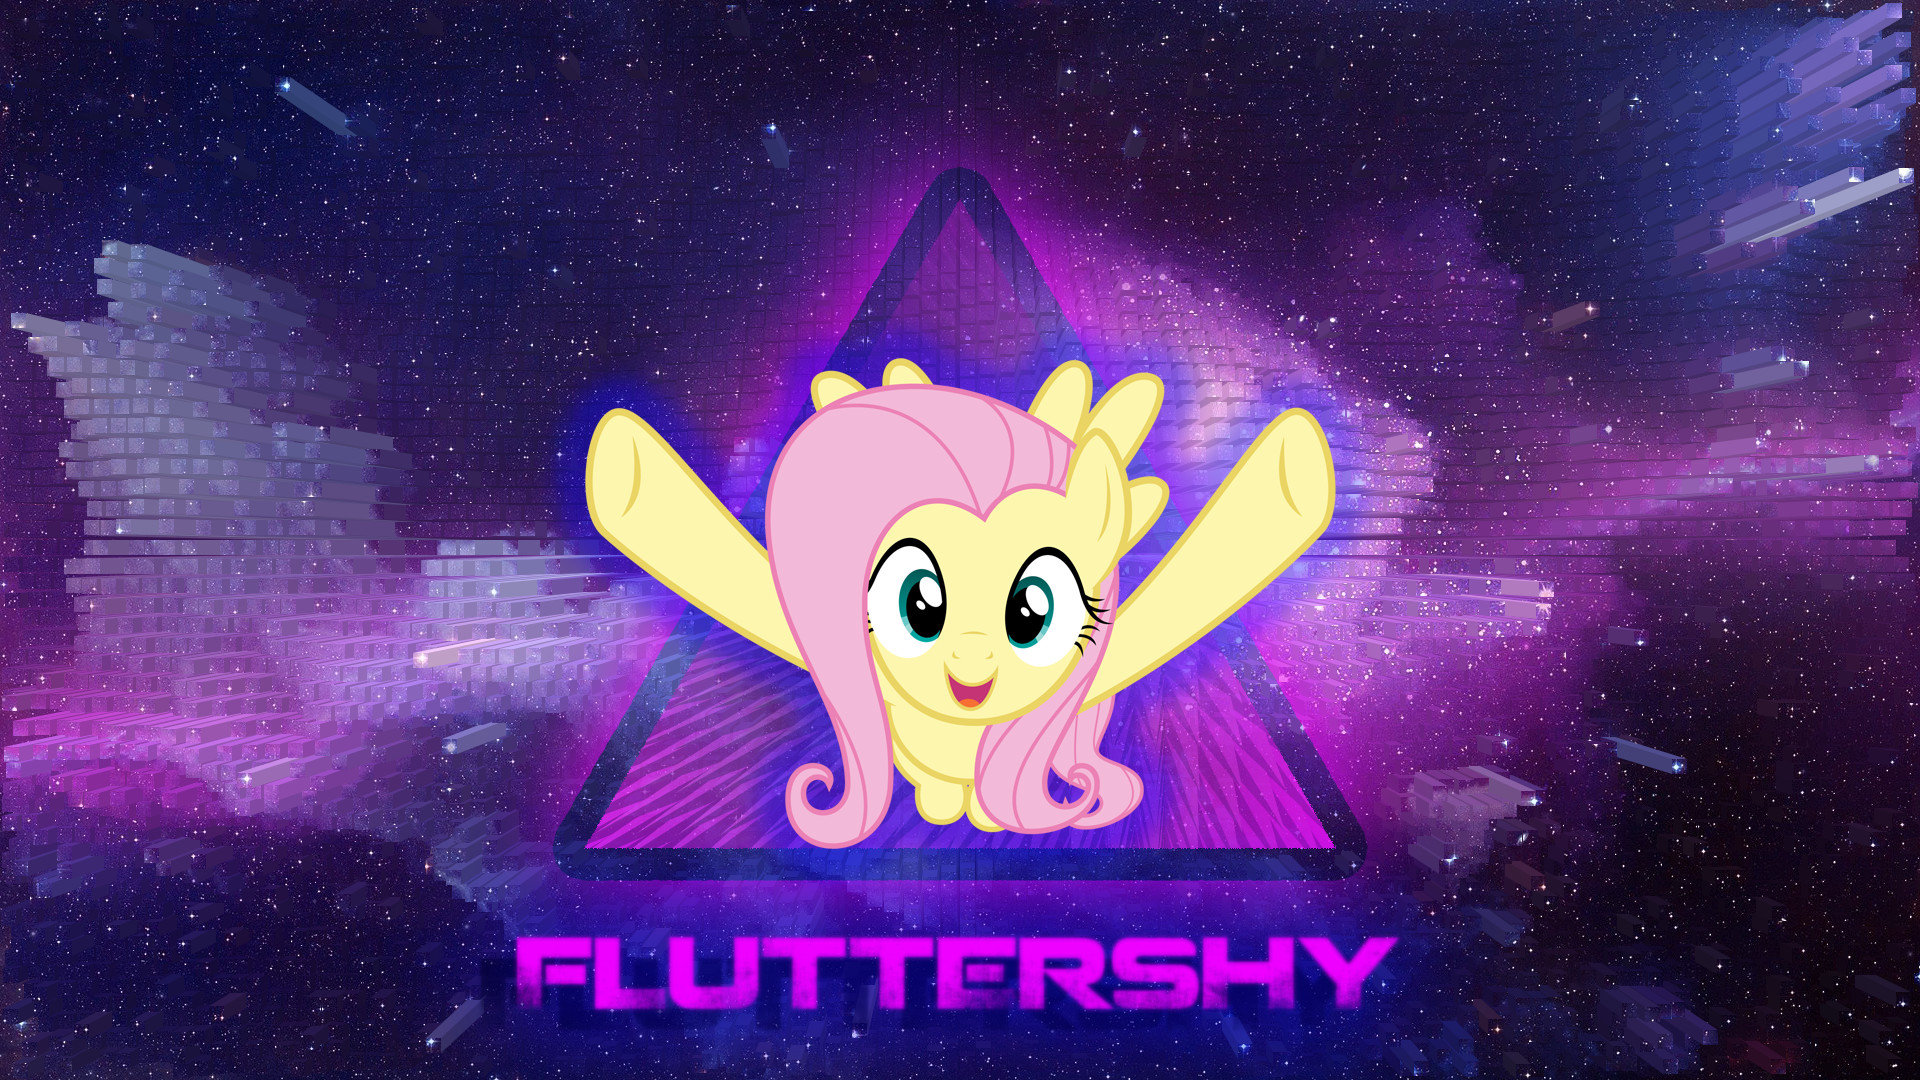 1920x1080 ... Fluttershy space galaxy cool new HD wallpapers by Fluttershy174